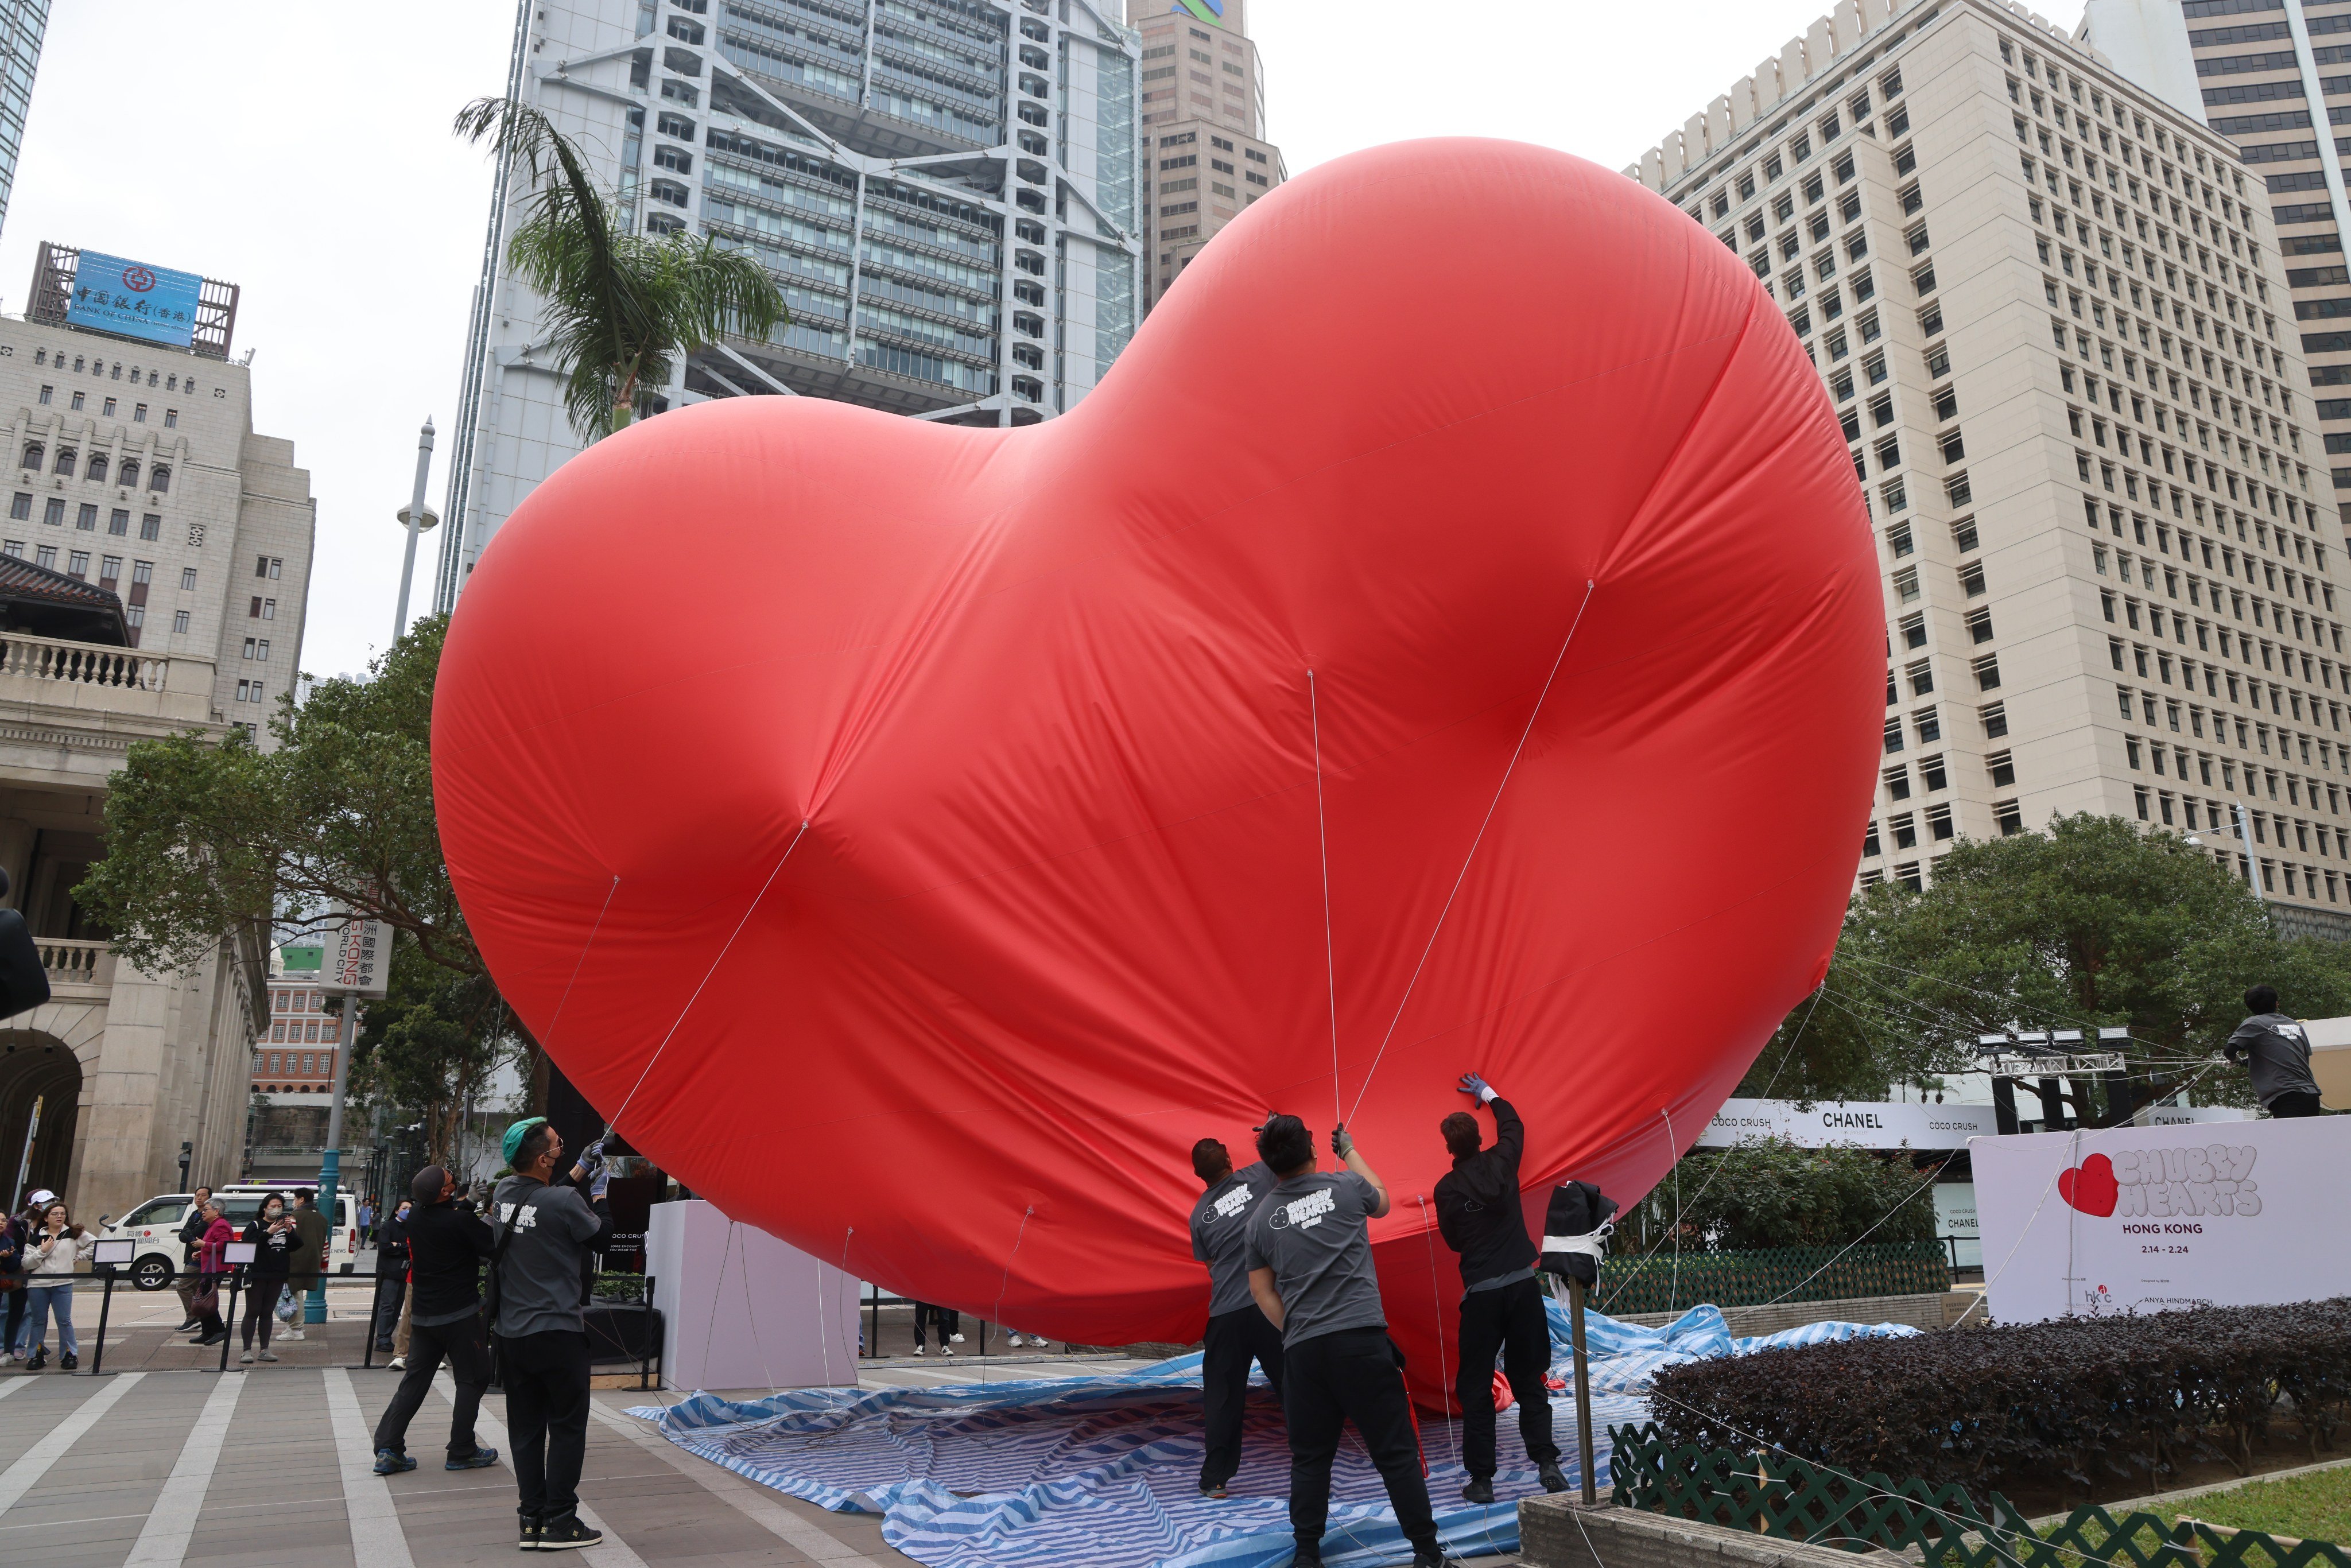 The “Chubby Hearts” display is by British designer Anya Hindmarch. Photo: Dickson Lee